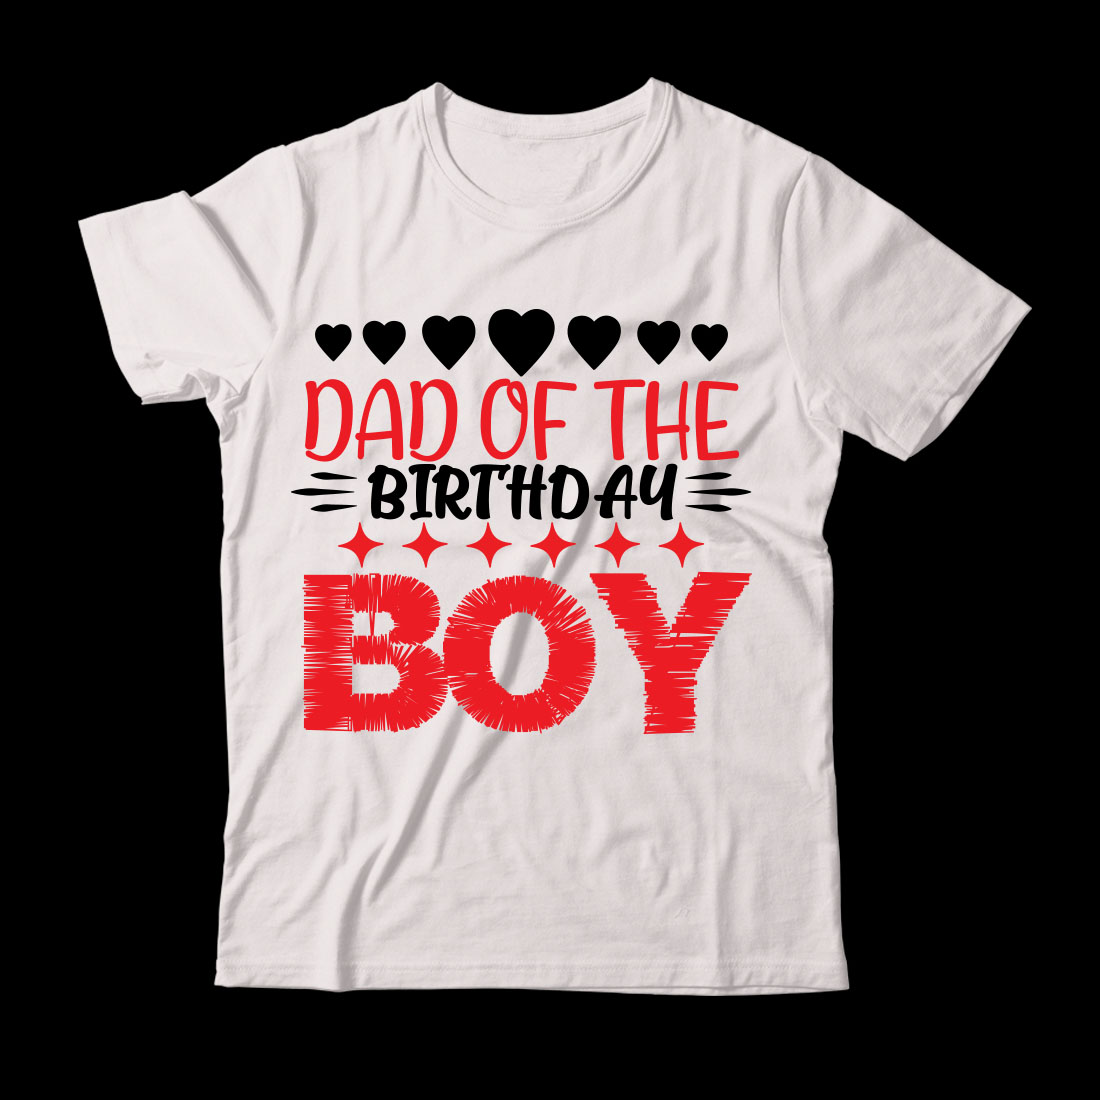 T - shirt that says dad of the birthday boy.